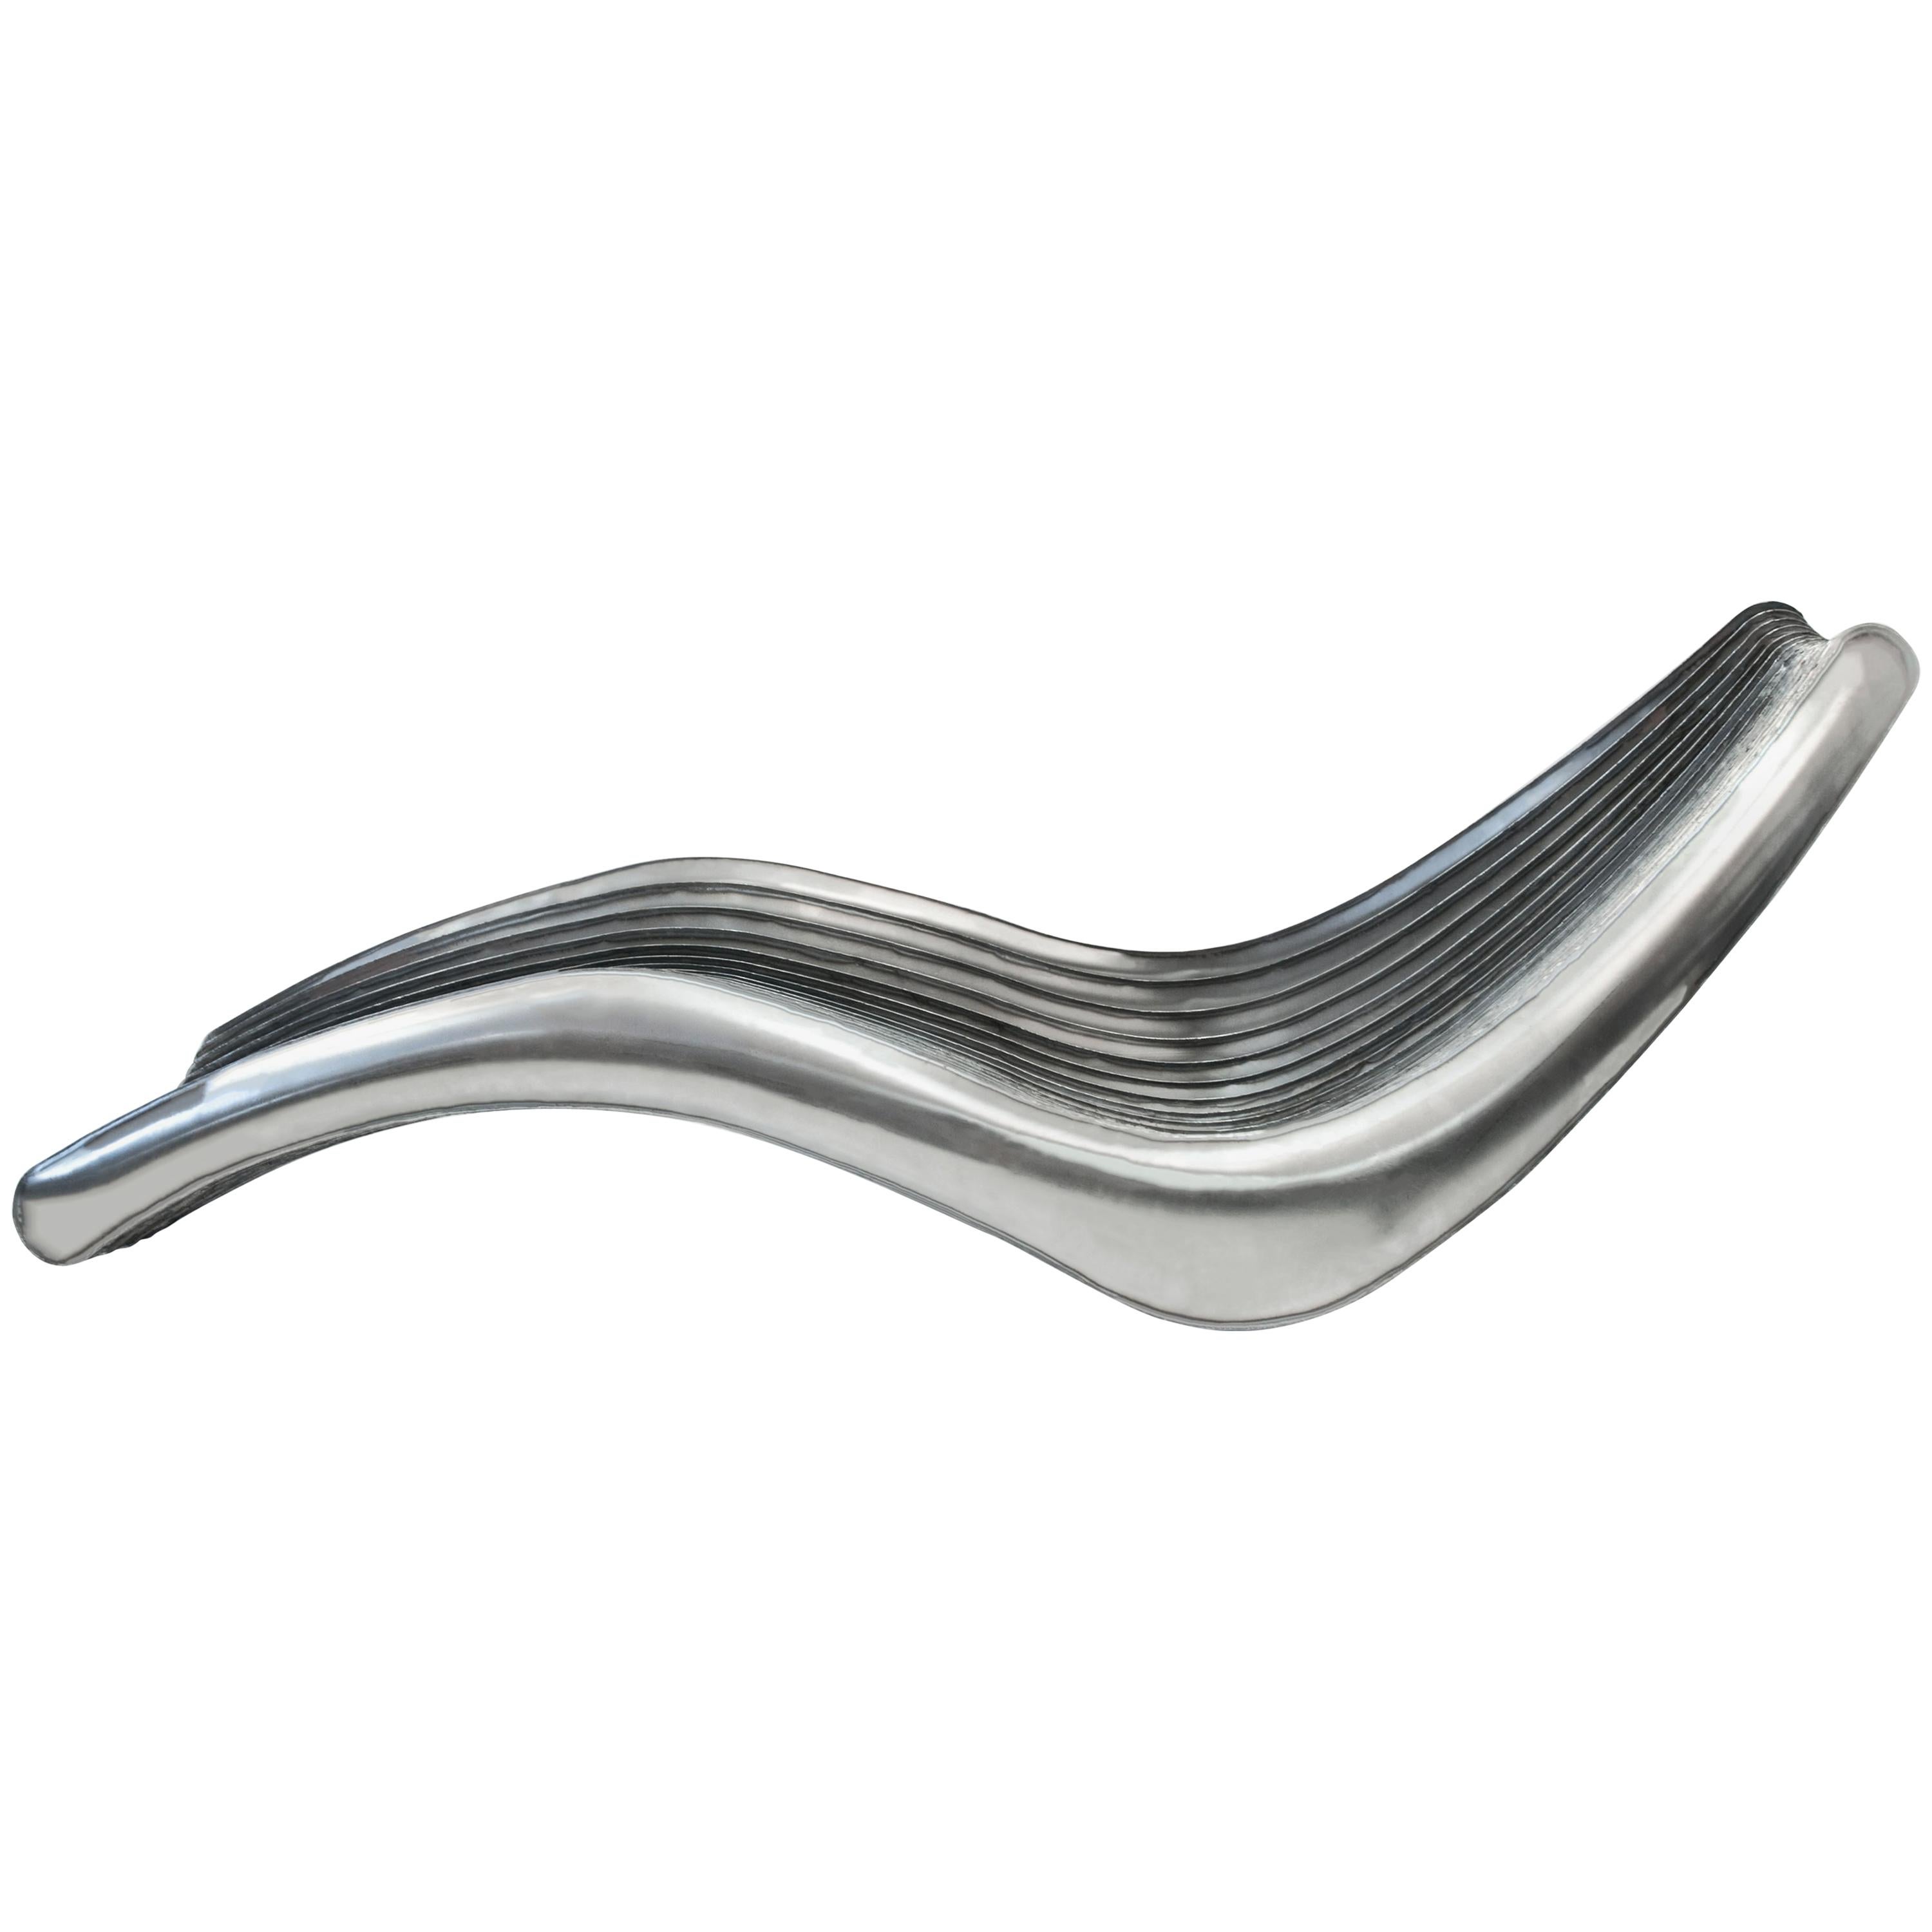 Limited Edition Steel in Rotation Chaise Lounge in Polished Stainless Steel